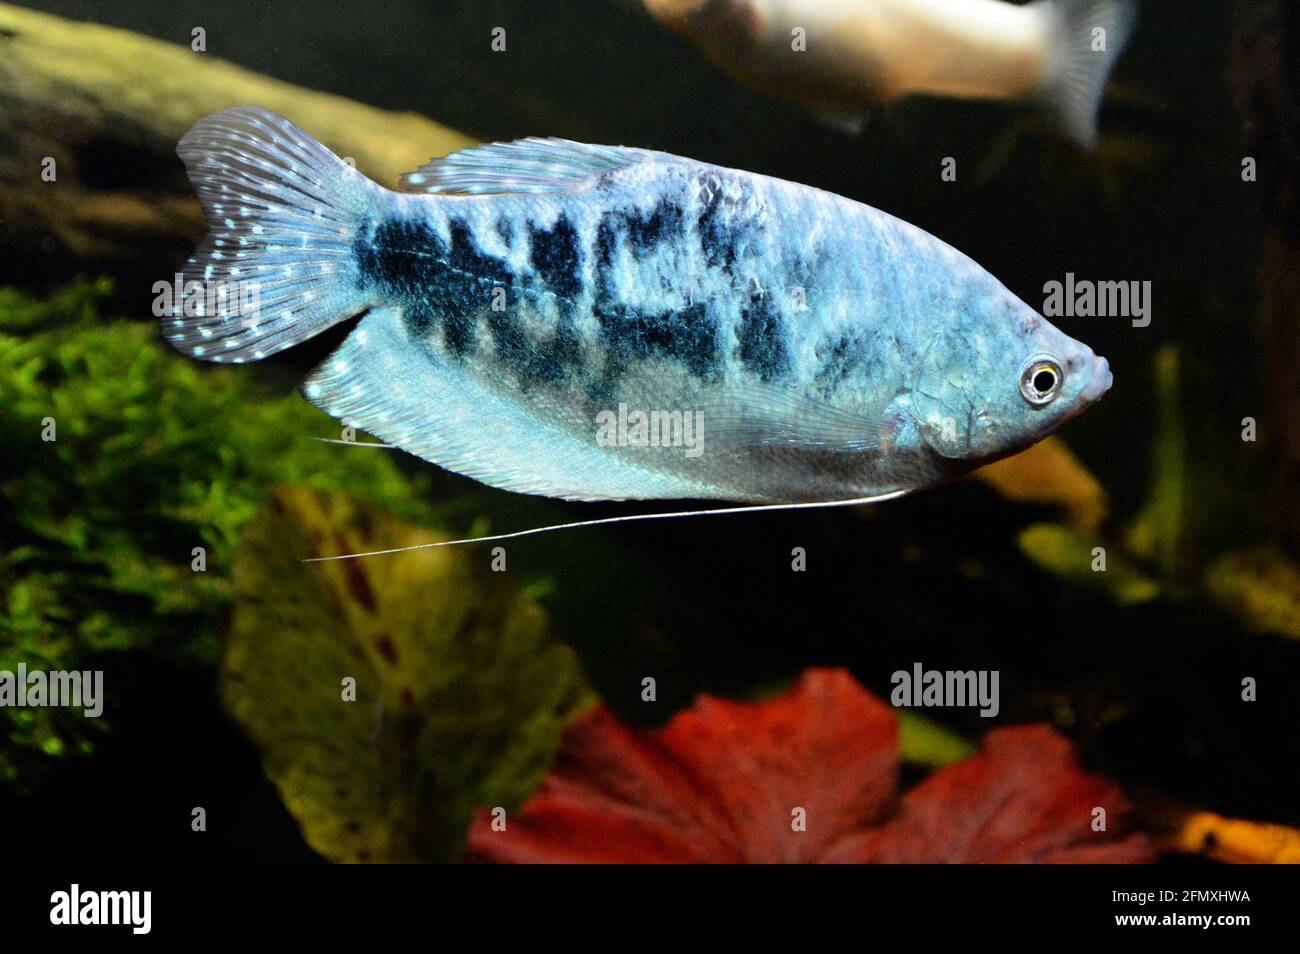 A beautiful blue fish of type three spot gourami and variety opaline gourami or blue gourami. This is a tropical and Asian fish. Stock Photo